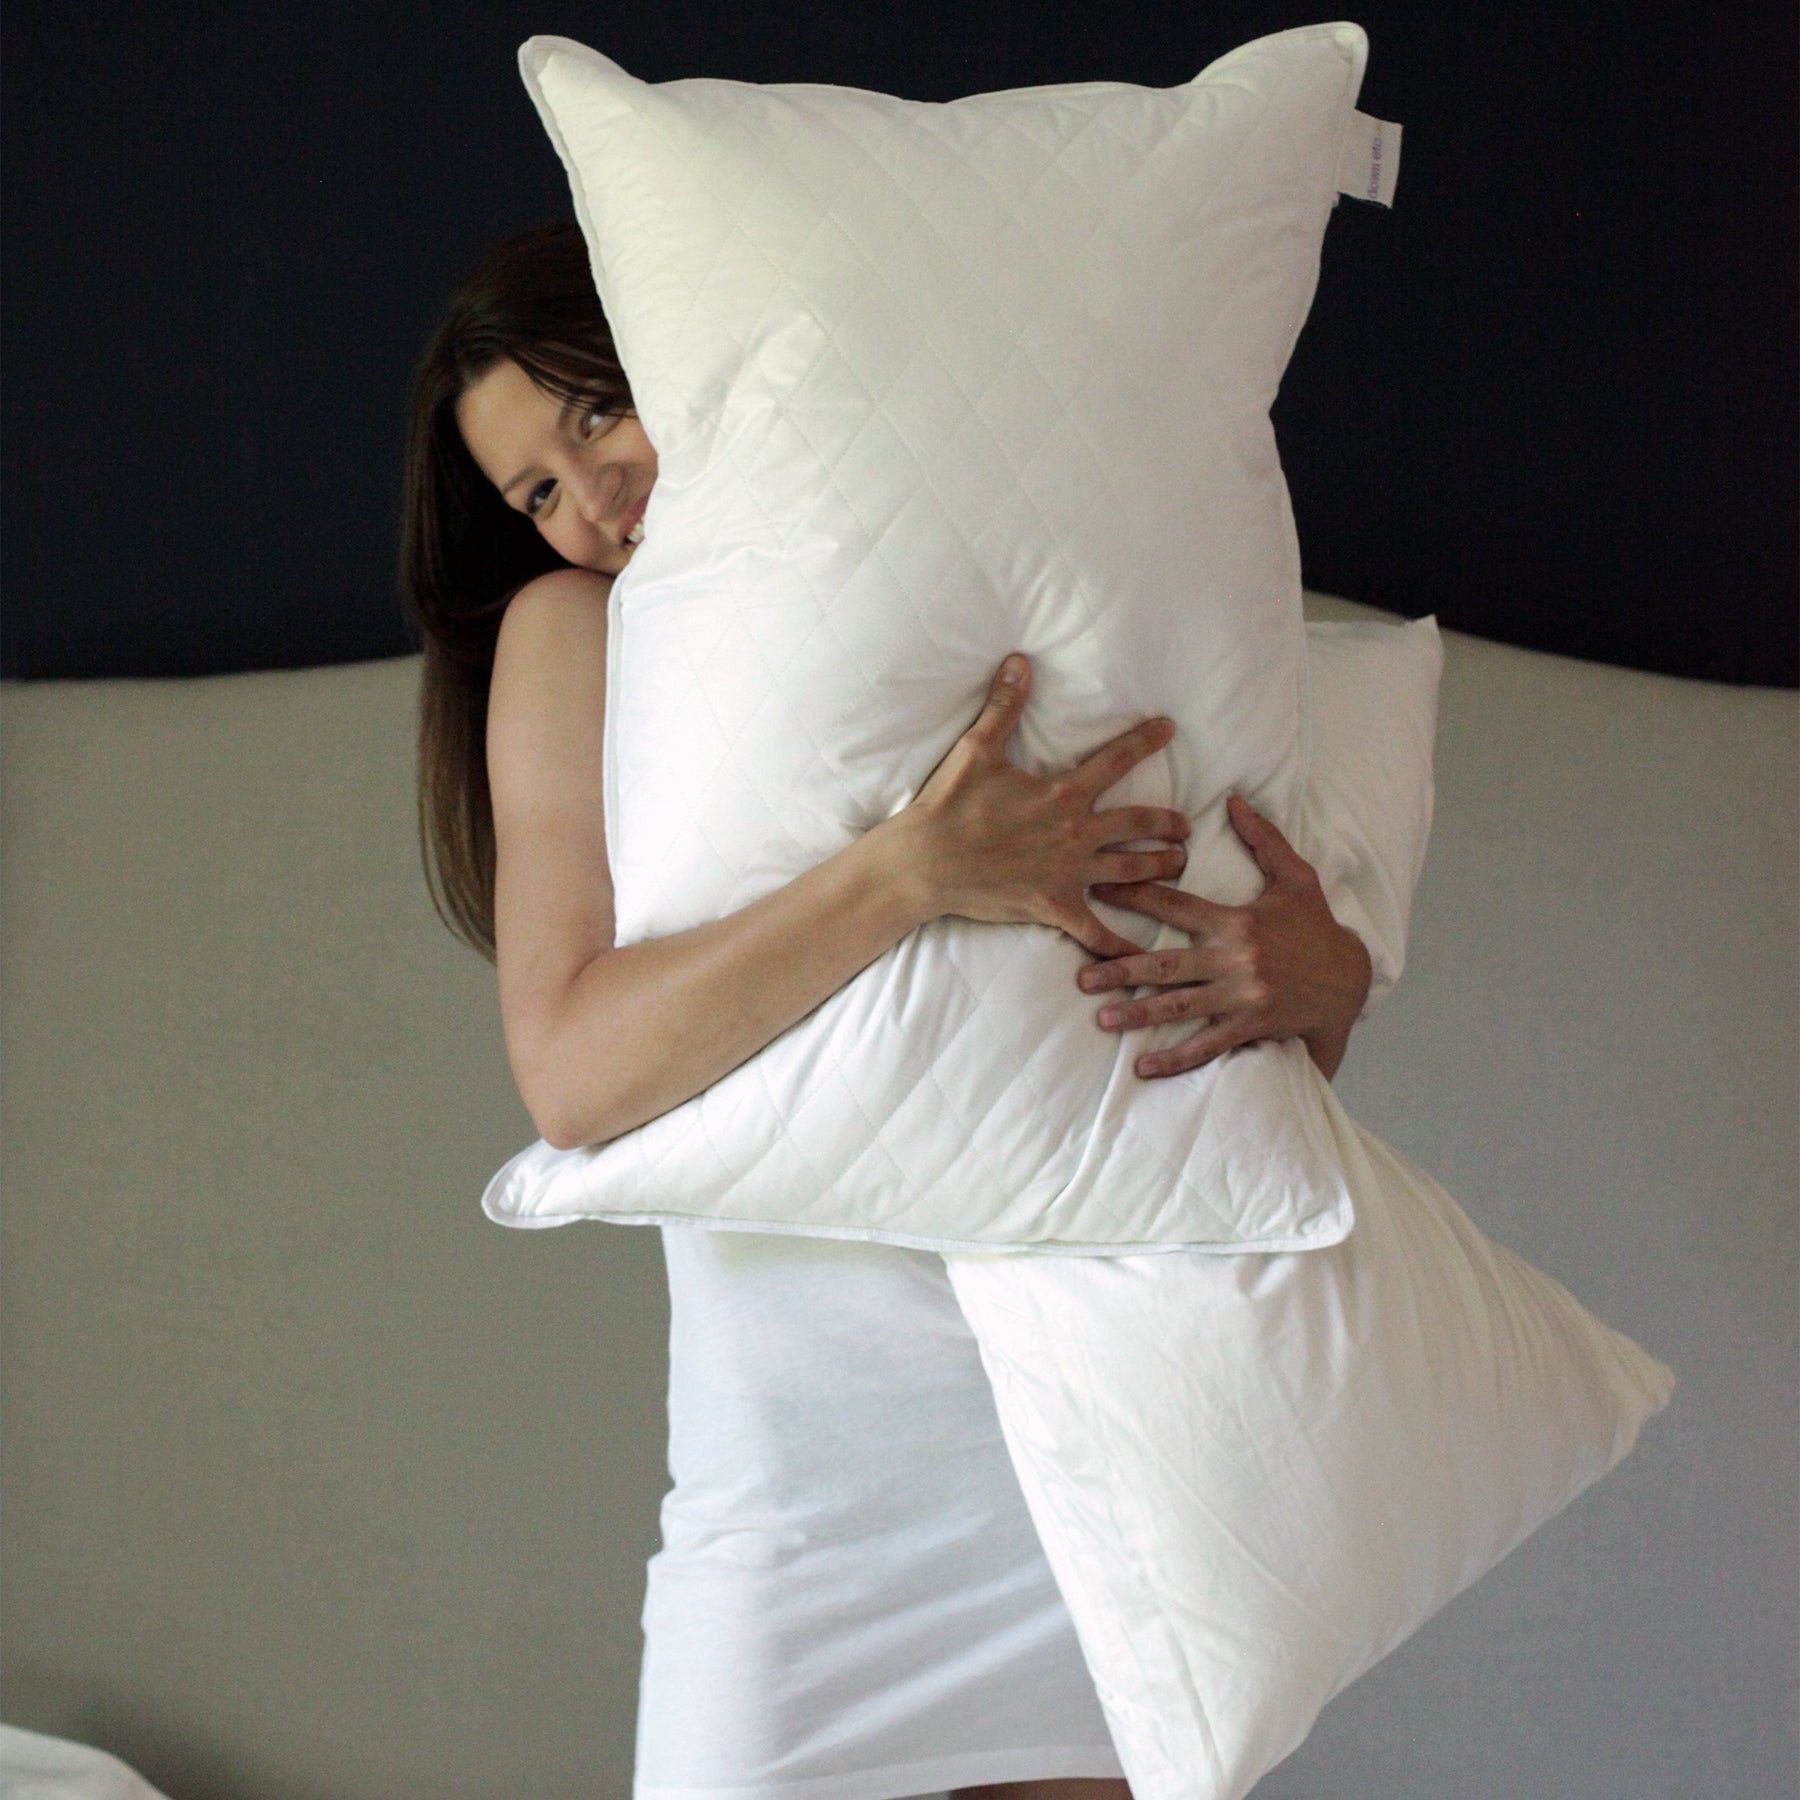 Down Etc. Diamond Support Feather & Down Pillow